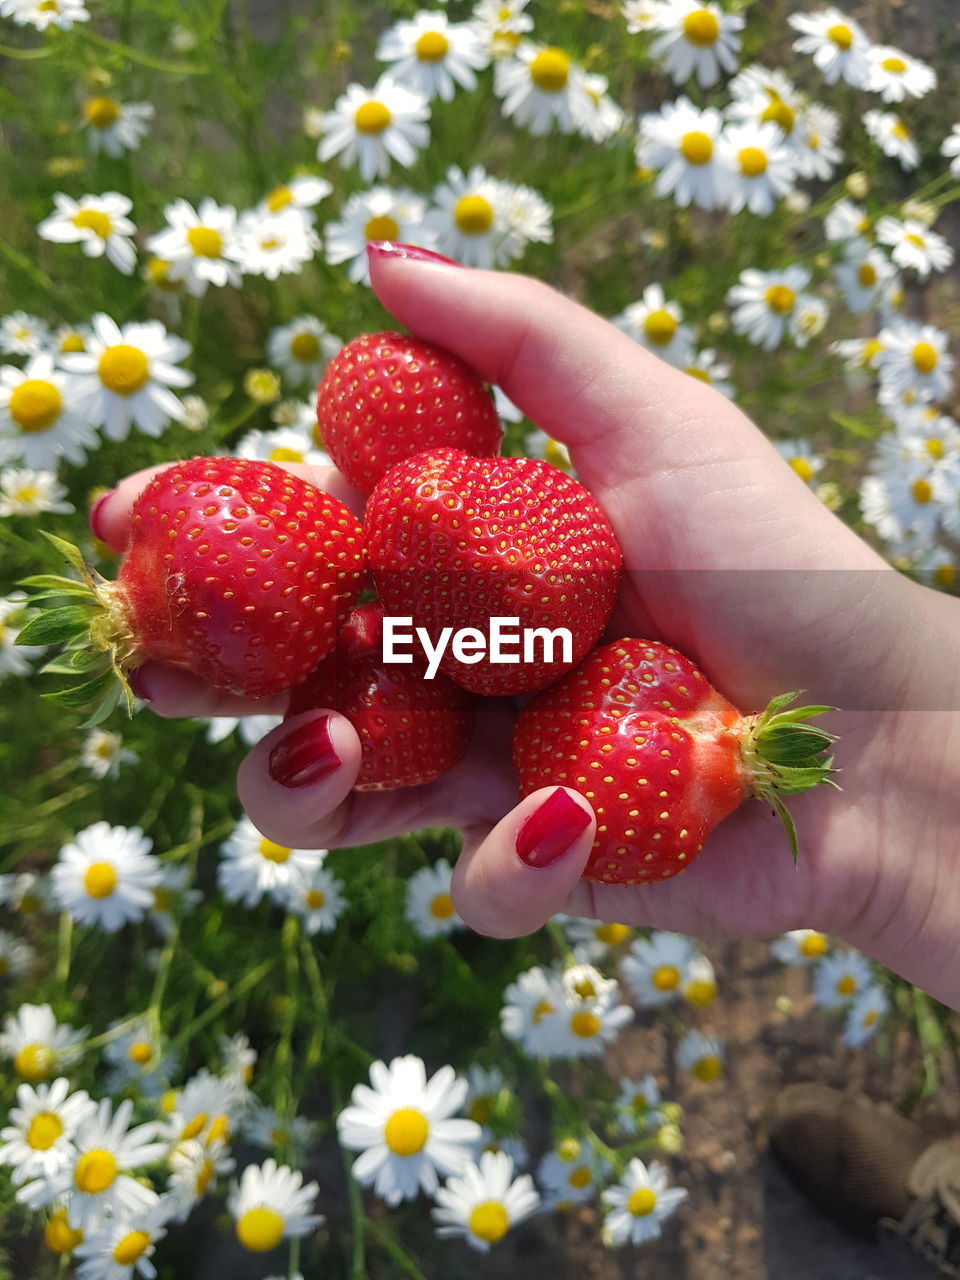 CLOSE-UP OF HAND HOLDING STRAWBERRIES IN RED ROSE